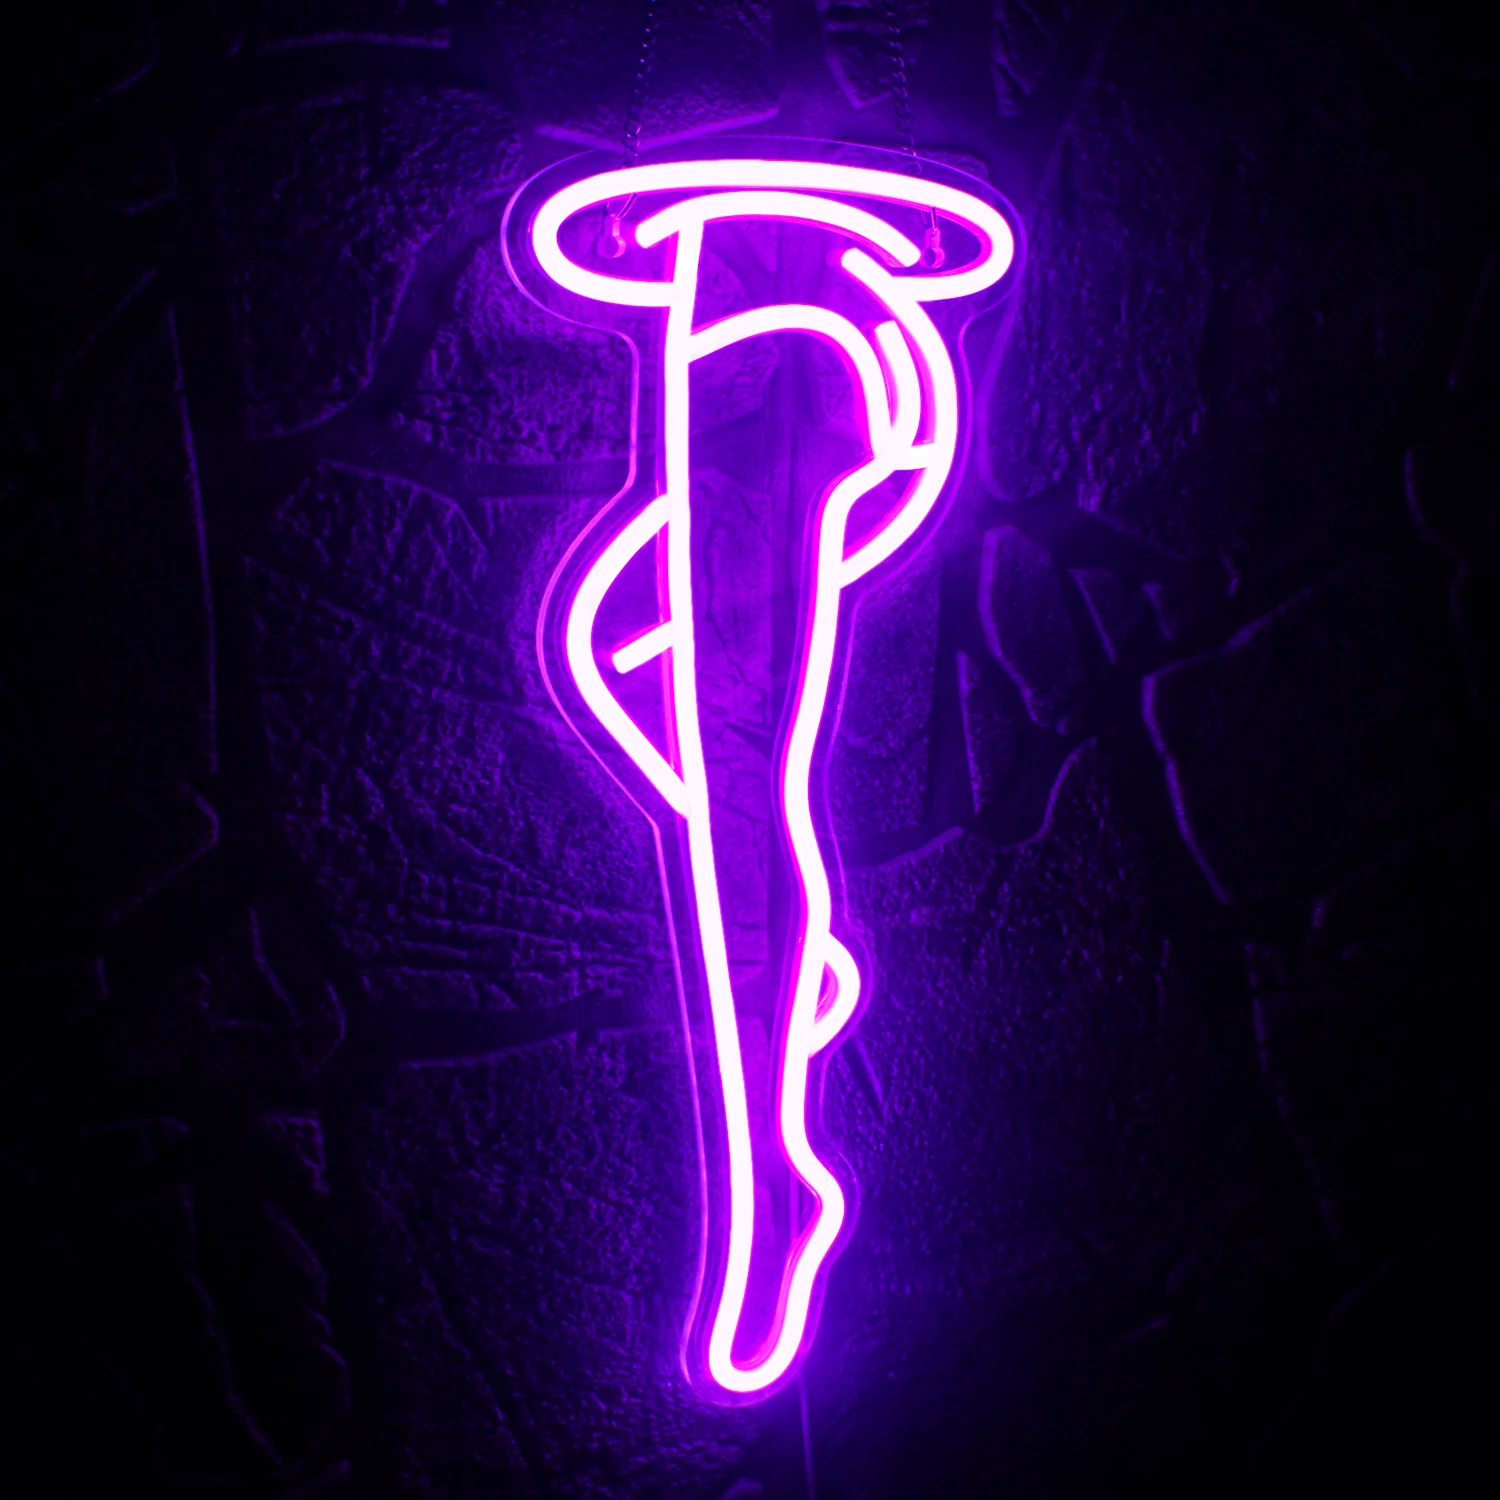 Leg Neon Sign Sexy Lady Leg Neon Signs Sexy Flying Led Light up Signs Bedroom Home Bar Cafes Game Room Party Fitness Wall Decor sexy lady back neon signs neon lady back wall sign art decorative signs lights for bar party hotel bright night neon light